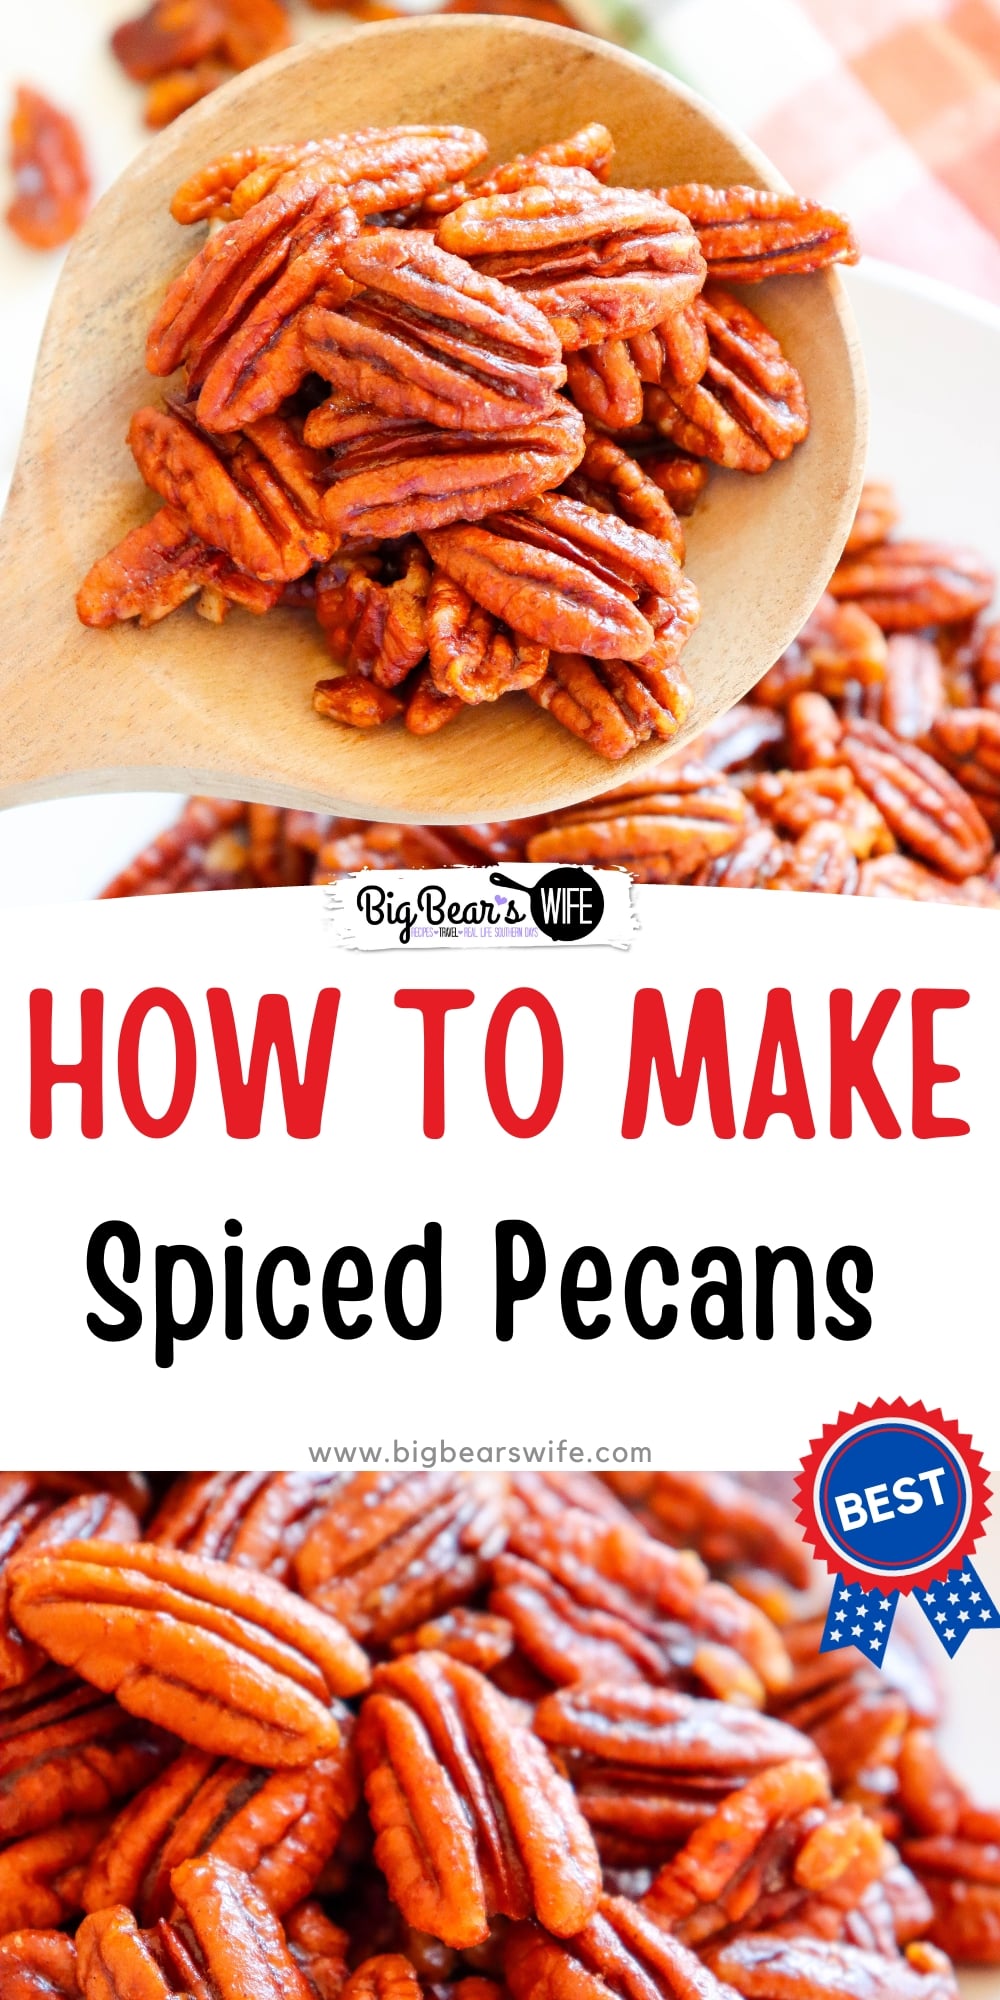 Calling all pecan lovers! Looking for a delicious and nutritious snack? Dive into these fantastic spiced pecans and experience the perfect balance of savory, sweet, and spice. These Spiced Pecans are great for snacking but also perfect for topping salads, muffins or cakes! via @bigbearswife